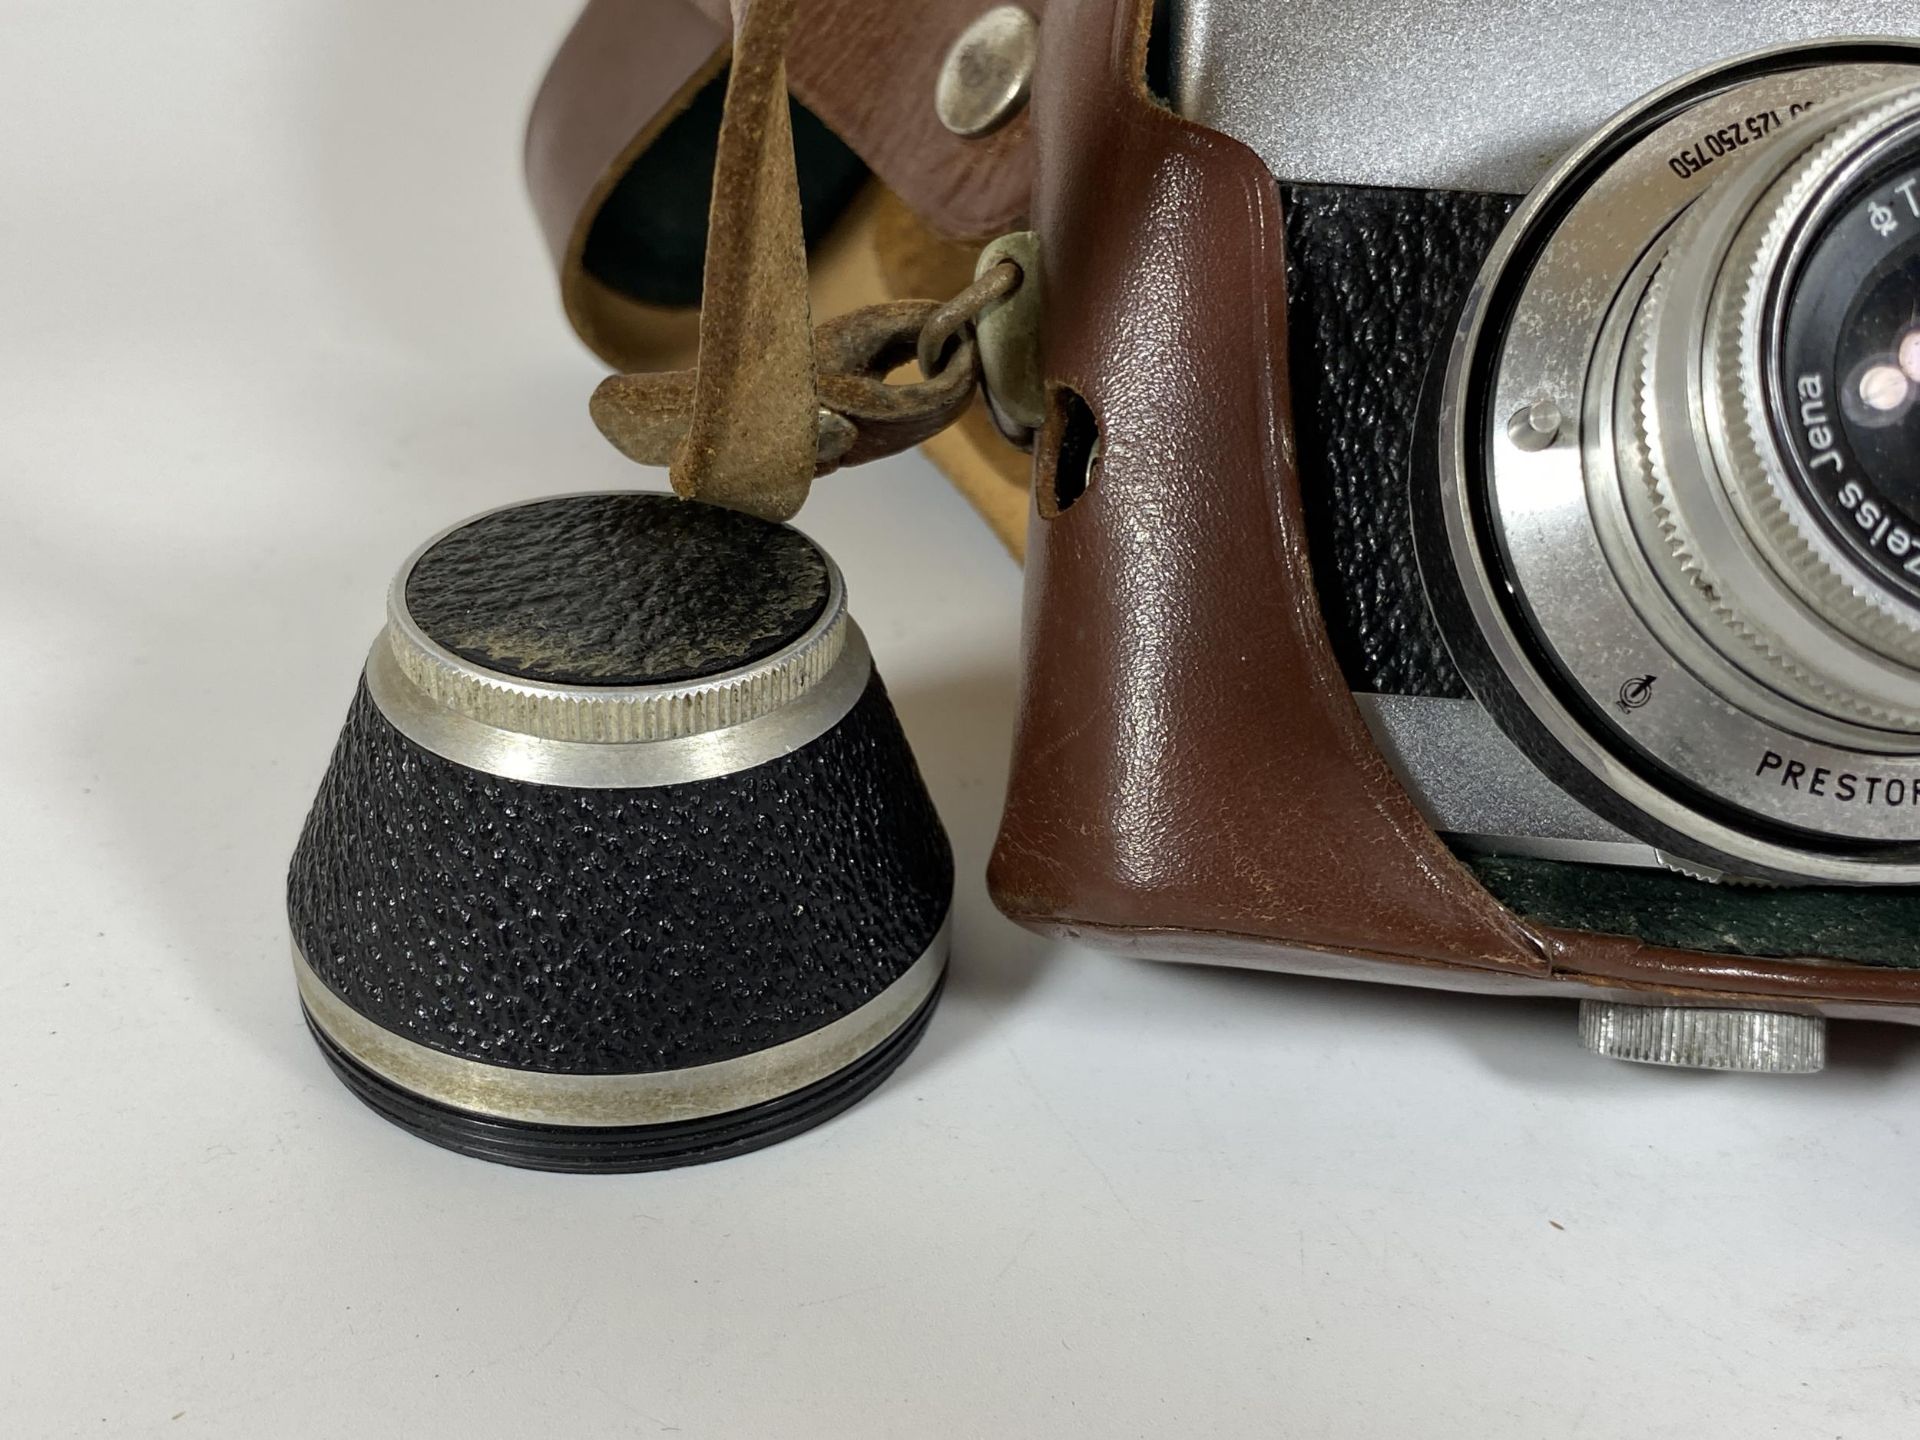 A VINTAGE CASED CARL ZEISS WERRA 1 CAMERA WITH TESSAR 50MM LENS - Image 3 of 3